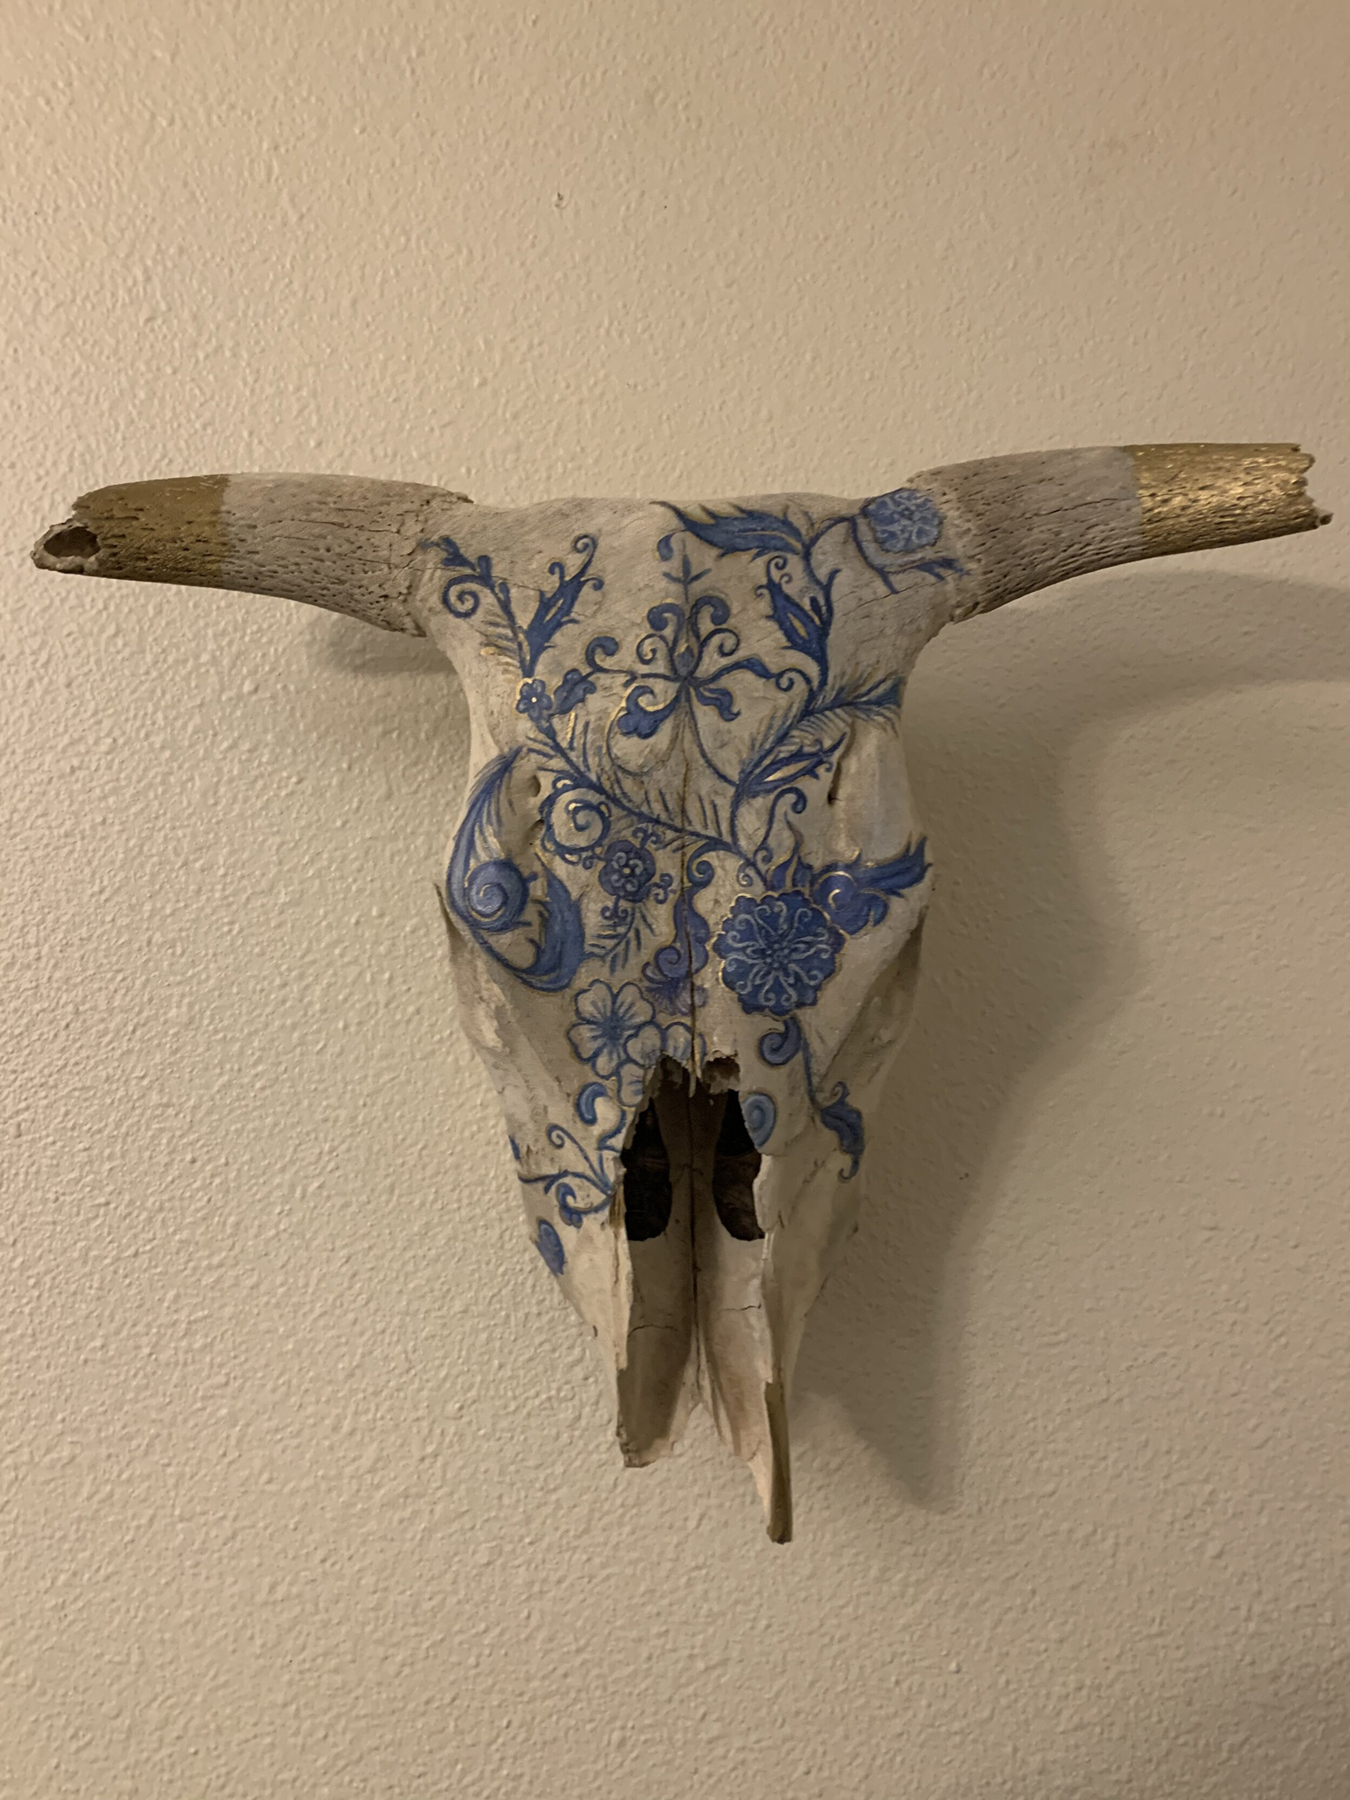 Natural bull skull with blue china pattern created with colored pencils and alcohol ink. image courtesy of Indi Walter